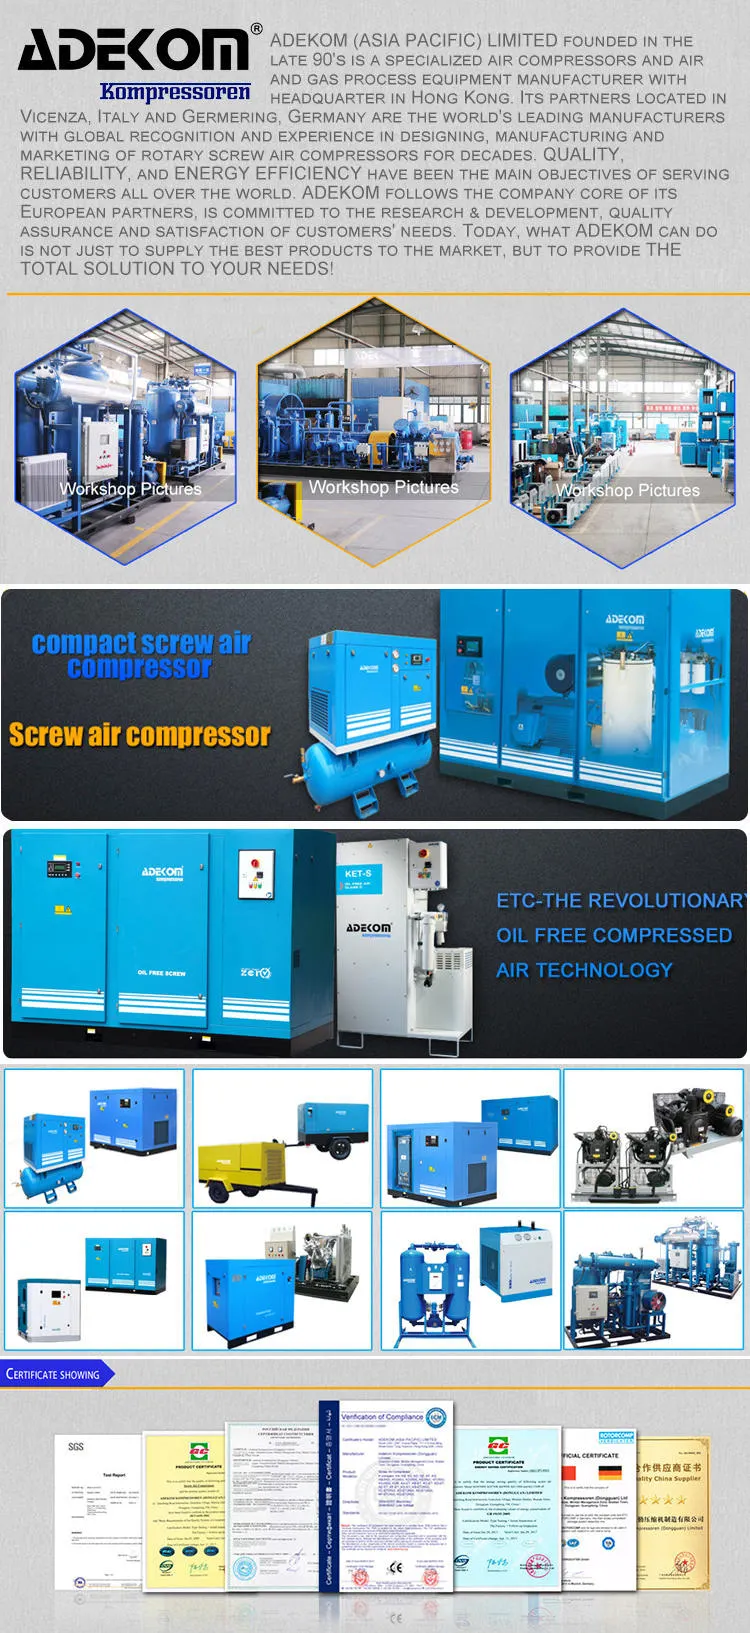 Skid-Mounted with Air Tank Compressed Screw Air Compressor System